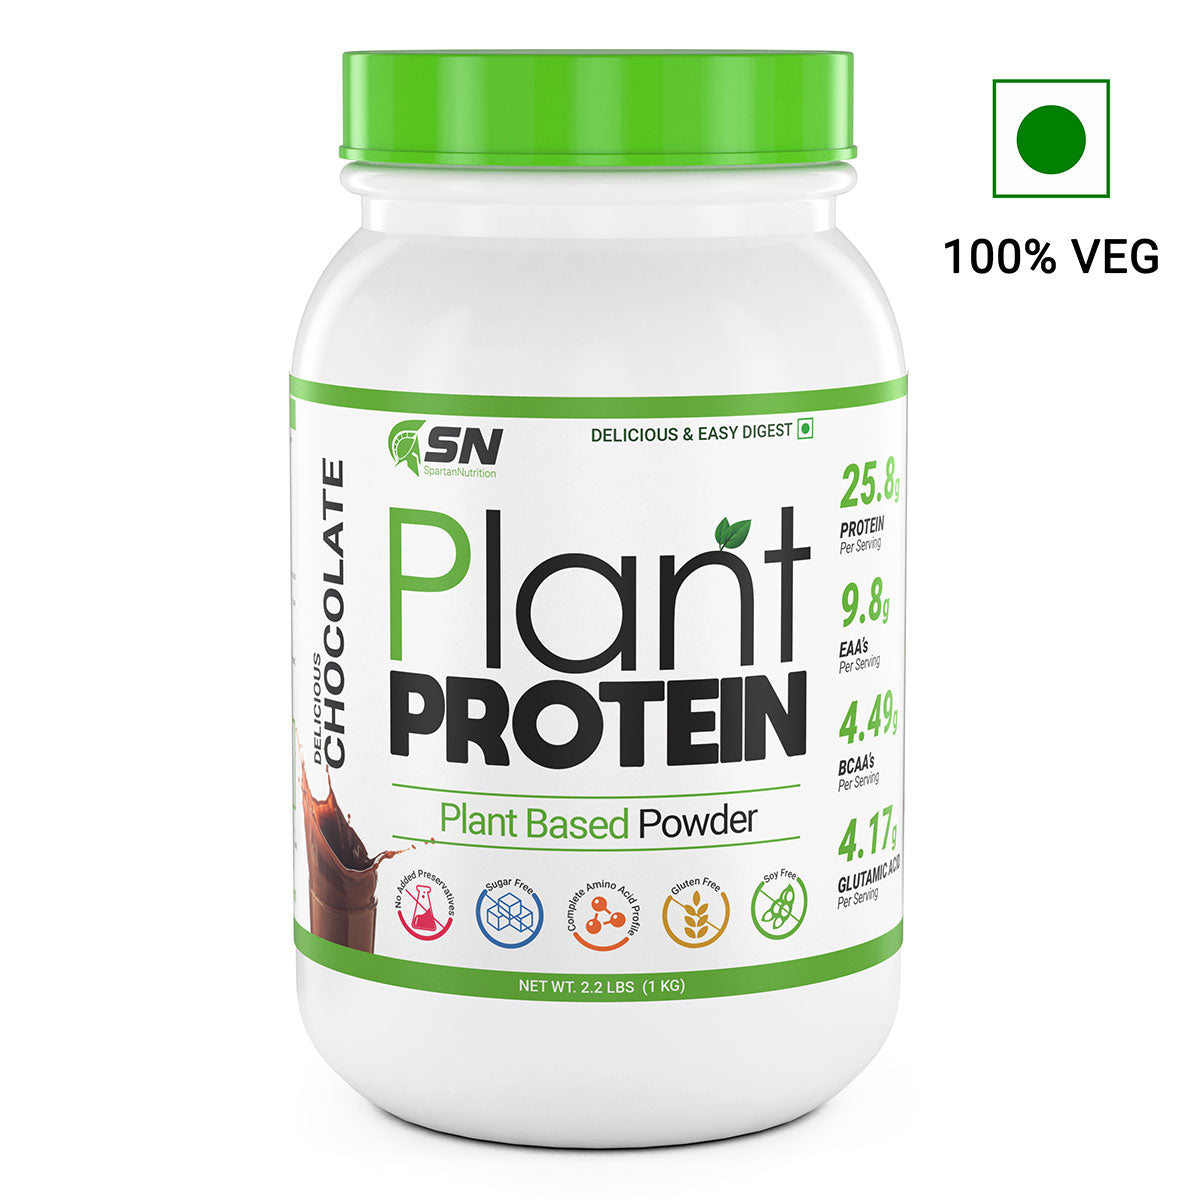 PLANT PROTEIN IMMUNE BOOSTER